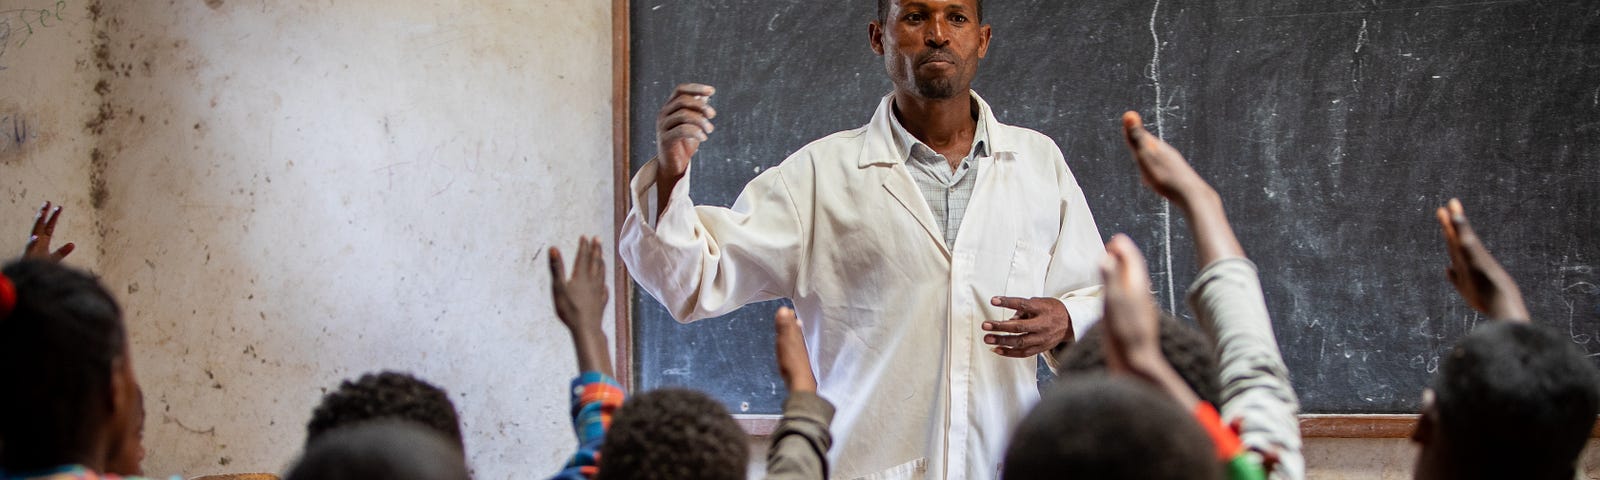 A man wearing a white lab coat stands in front of a blackboard in a room full of children sitting at desks and raising their hands.